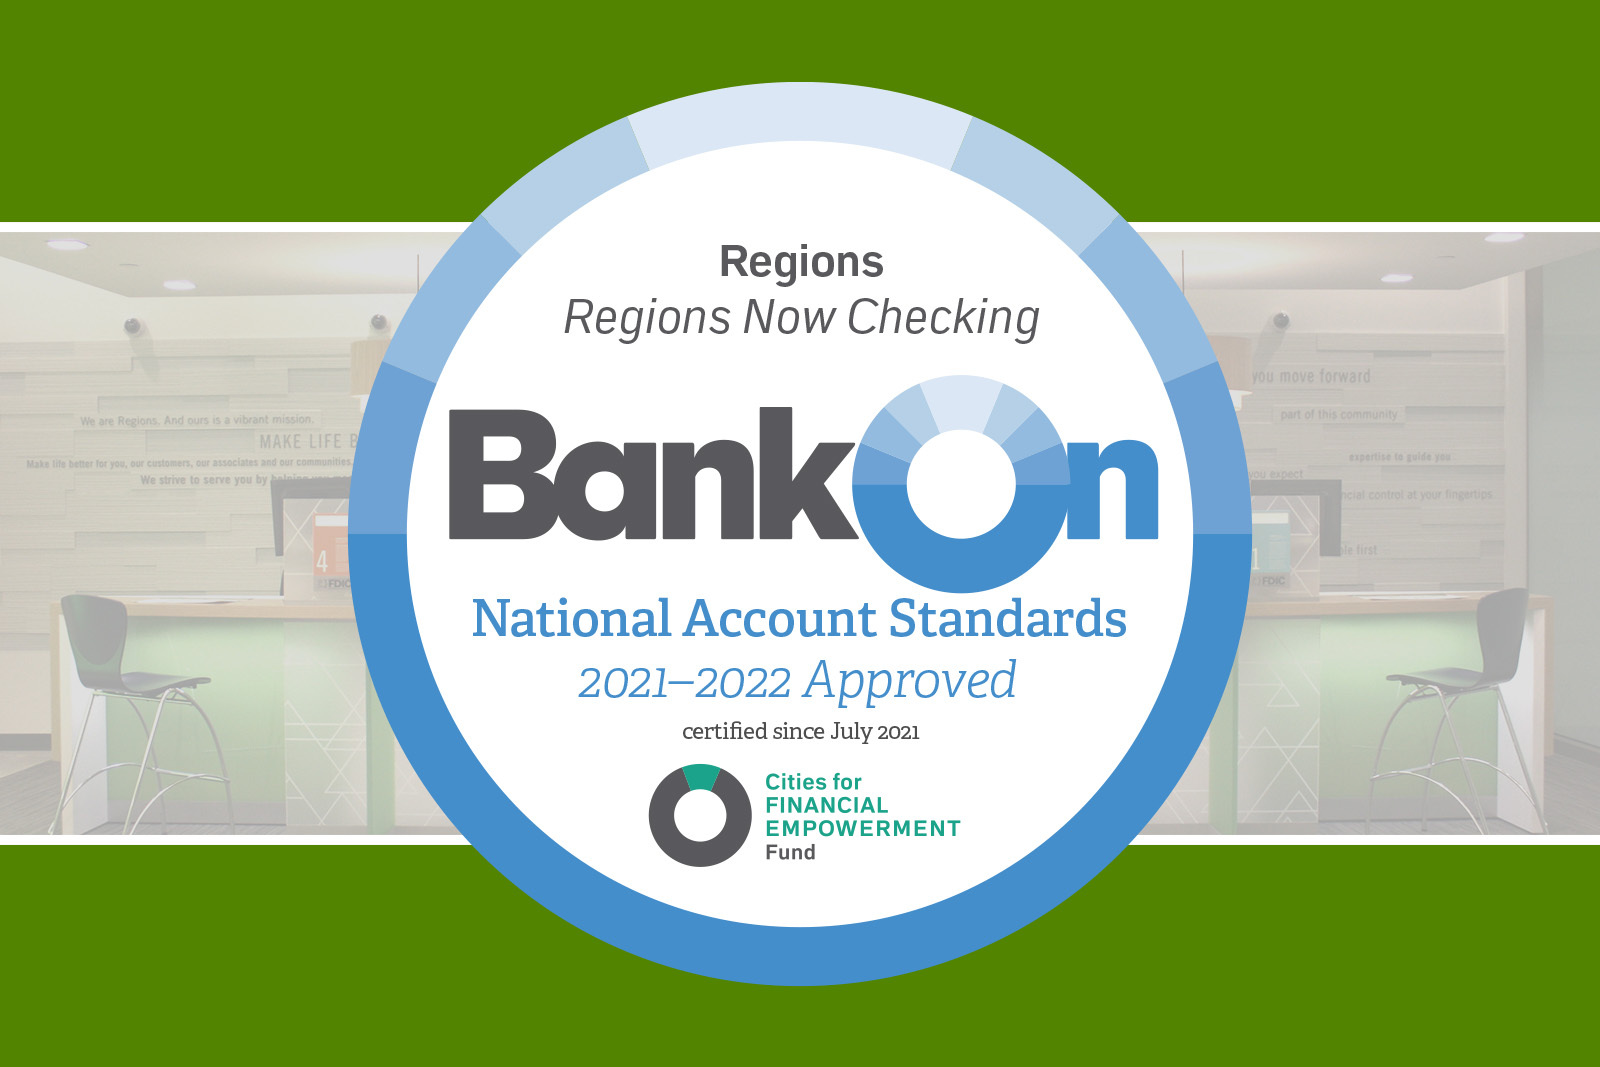 text that reads, "Regions Now Checking, BankOn, National Account Standards, 2021-2022 Approved, Certified since July 2021"